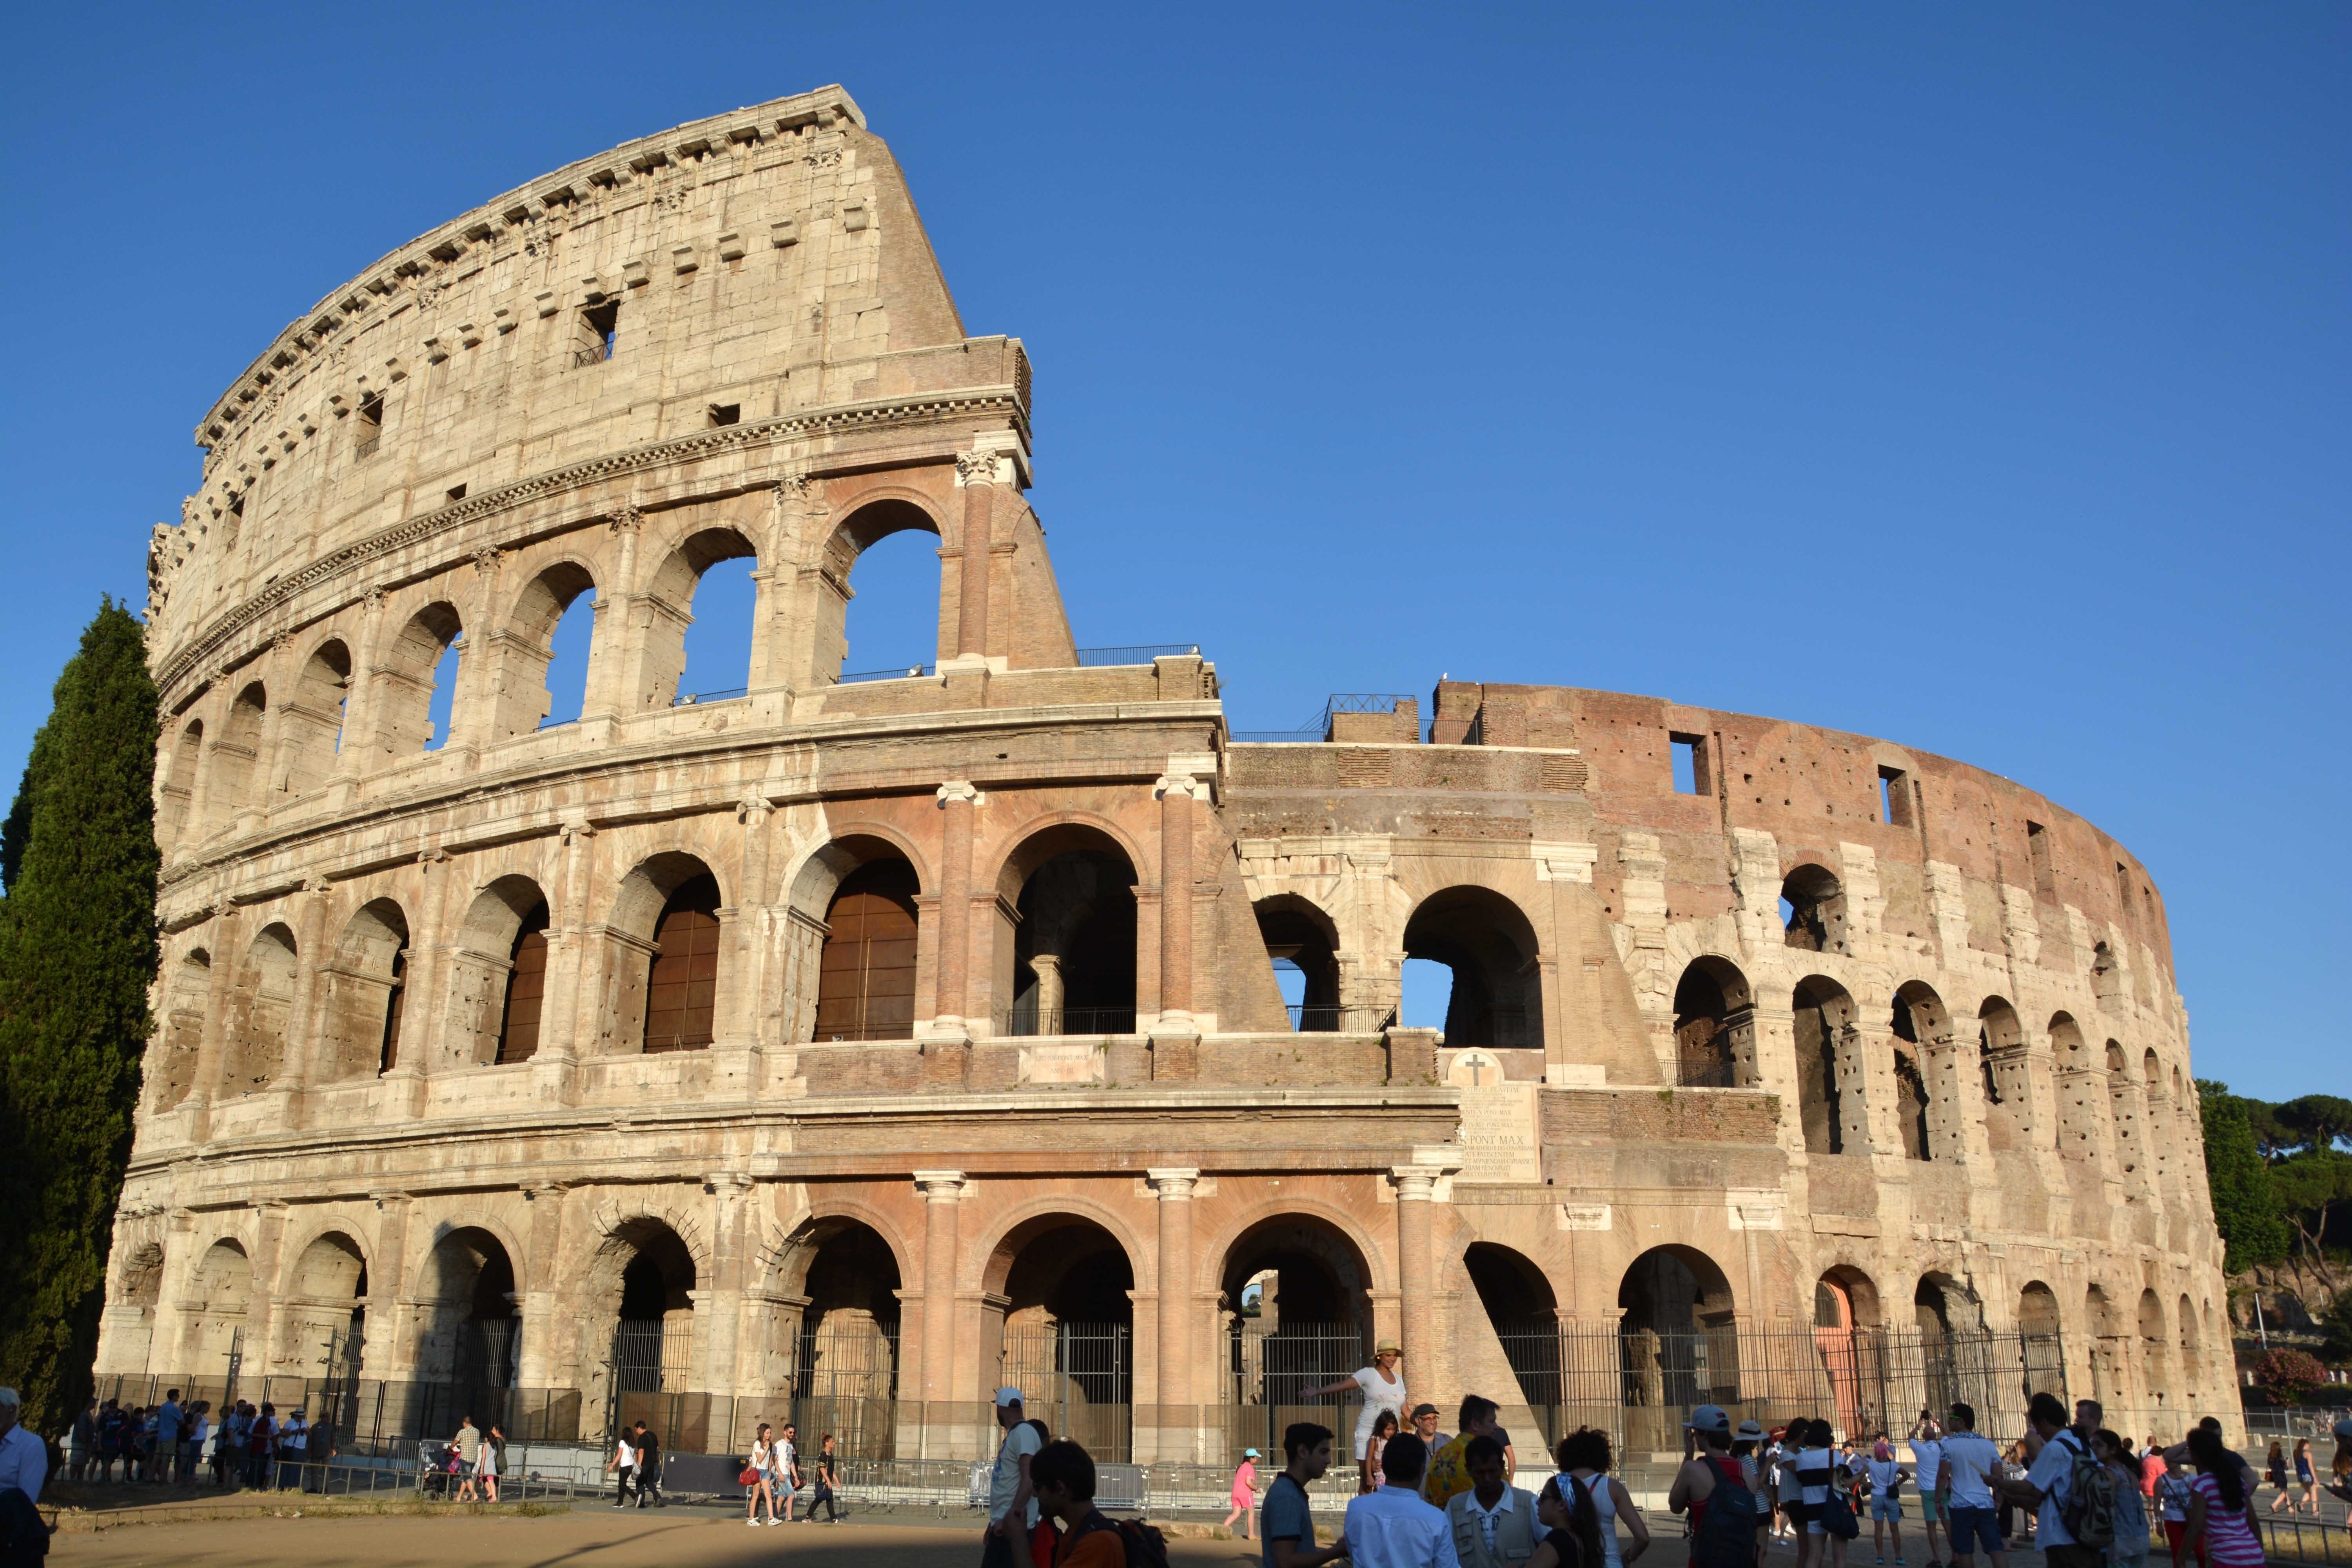 Amazing Colosseum Pictures & Backgrounds